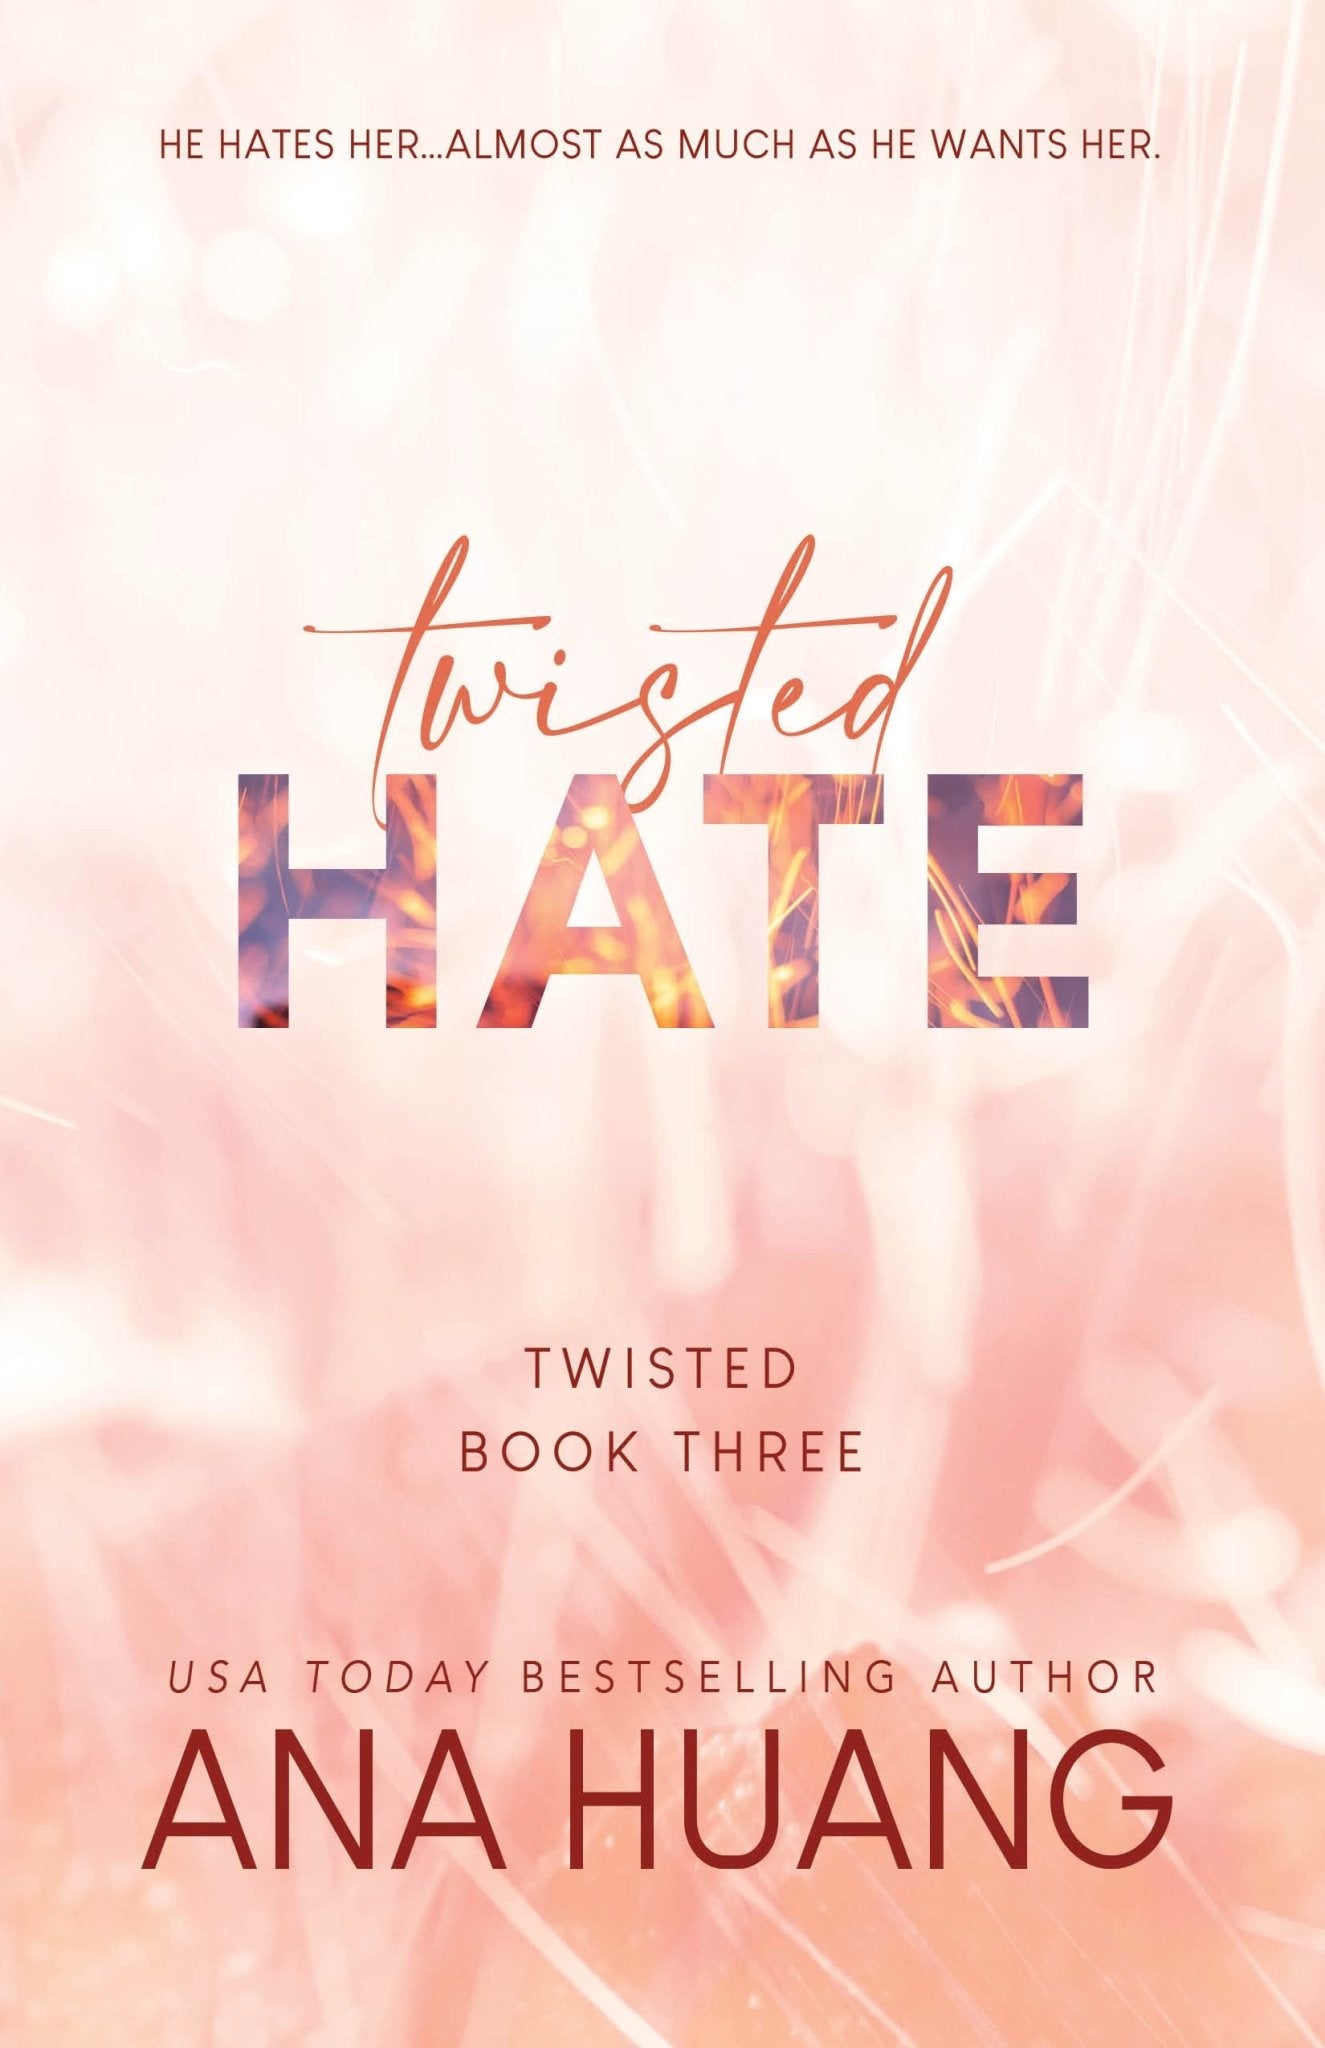 Twisted Hate (Twisted #3) by Ana Huang [Paperback] - LV'S Global Media